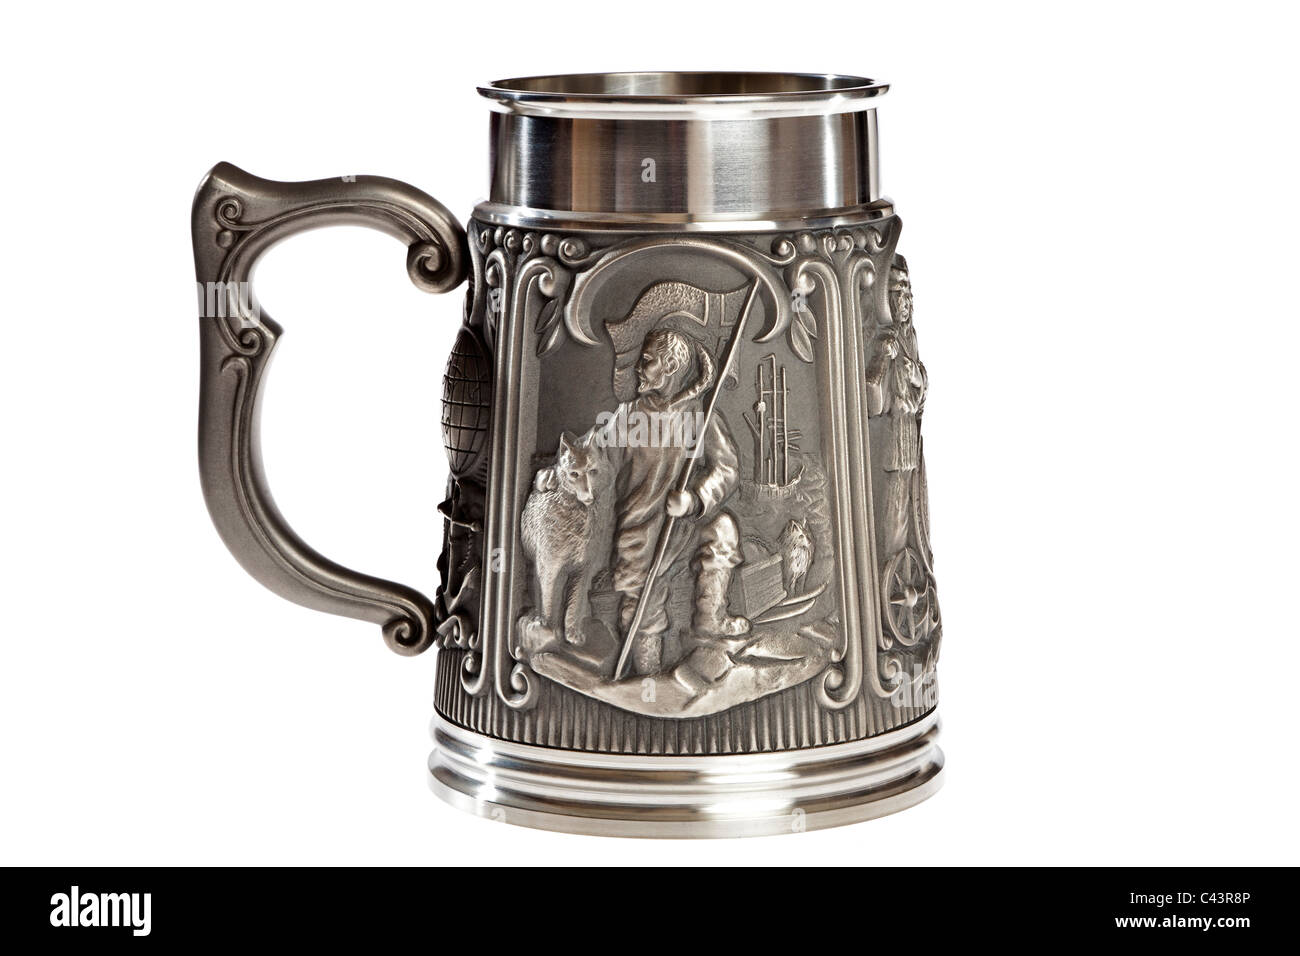 Norway's Roald Amundsen portrayed on Royal Geographical Society sesquicentennial pewter tankard 1830-1980 JMH4960 Stock Photo